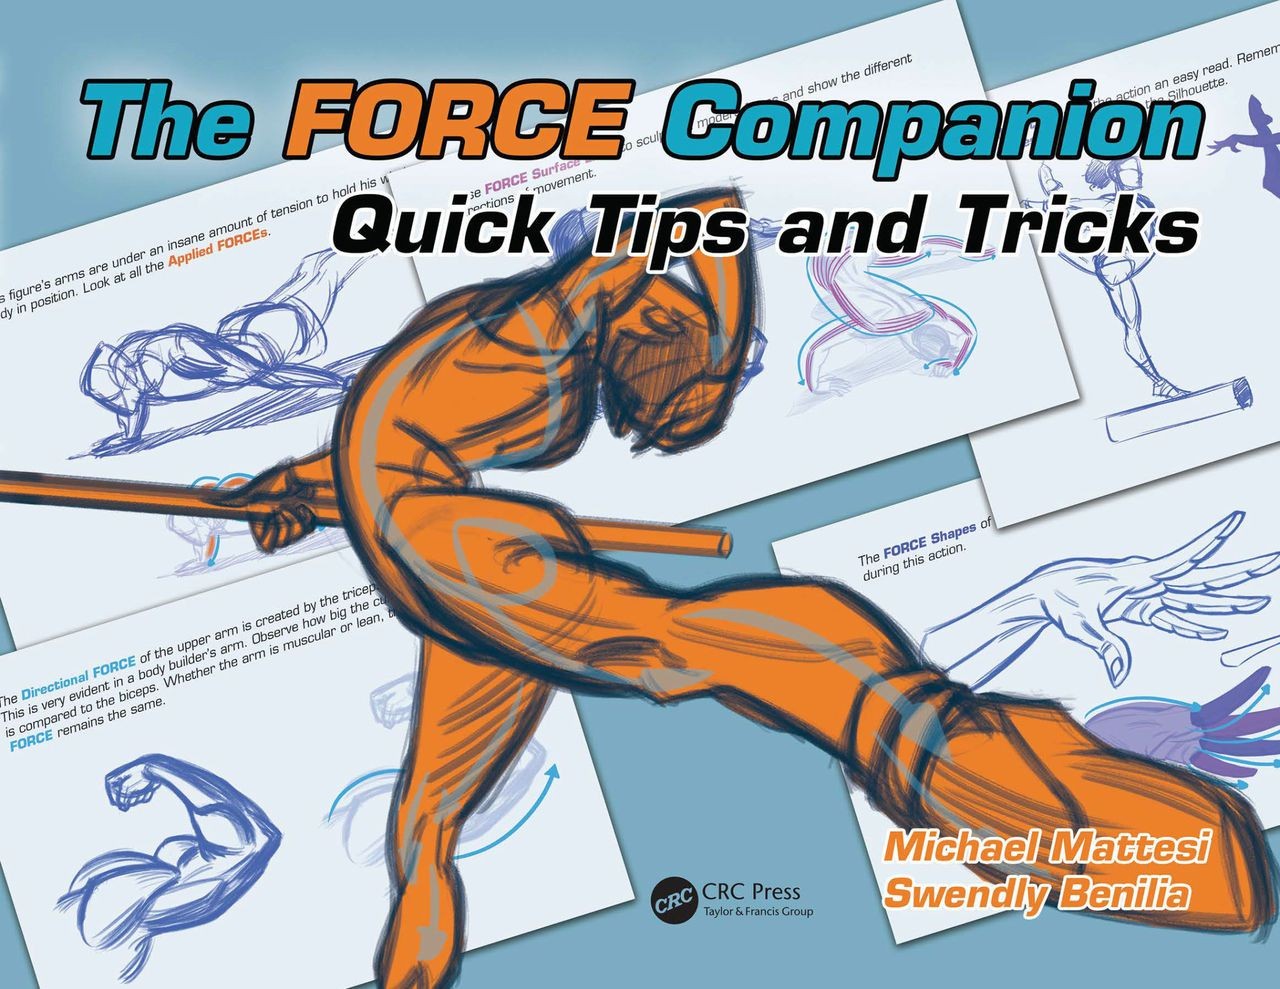 Spooning The Force Companion_ Quick Tips And Tricks-CRC Press (2019) - Michael D. Mattesi [Digital] Stepson